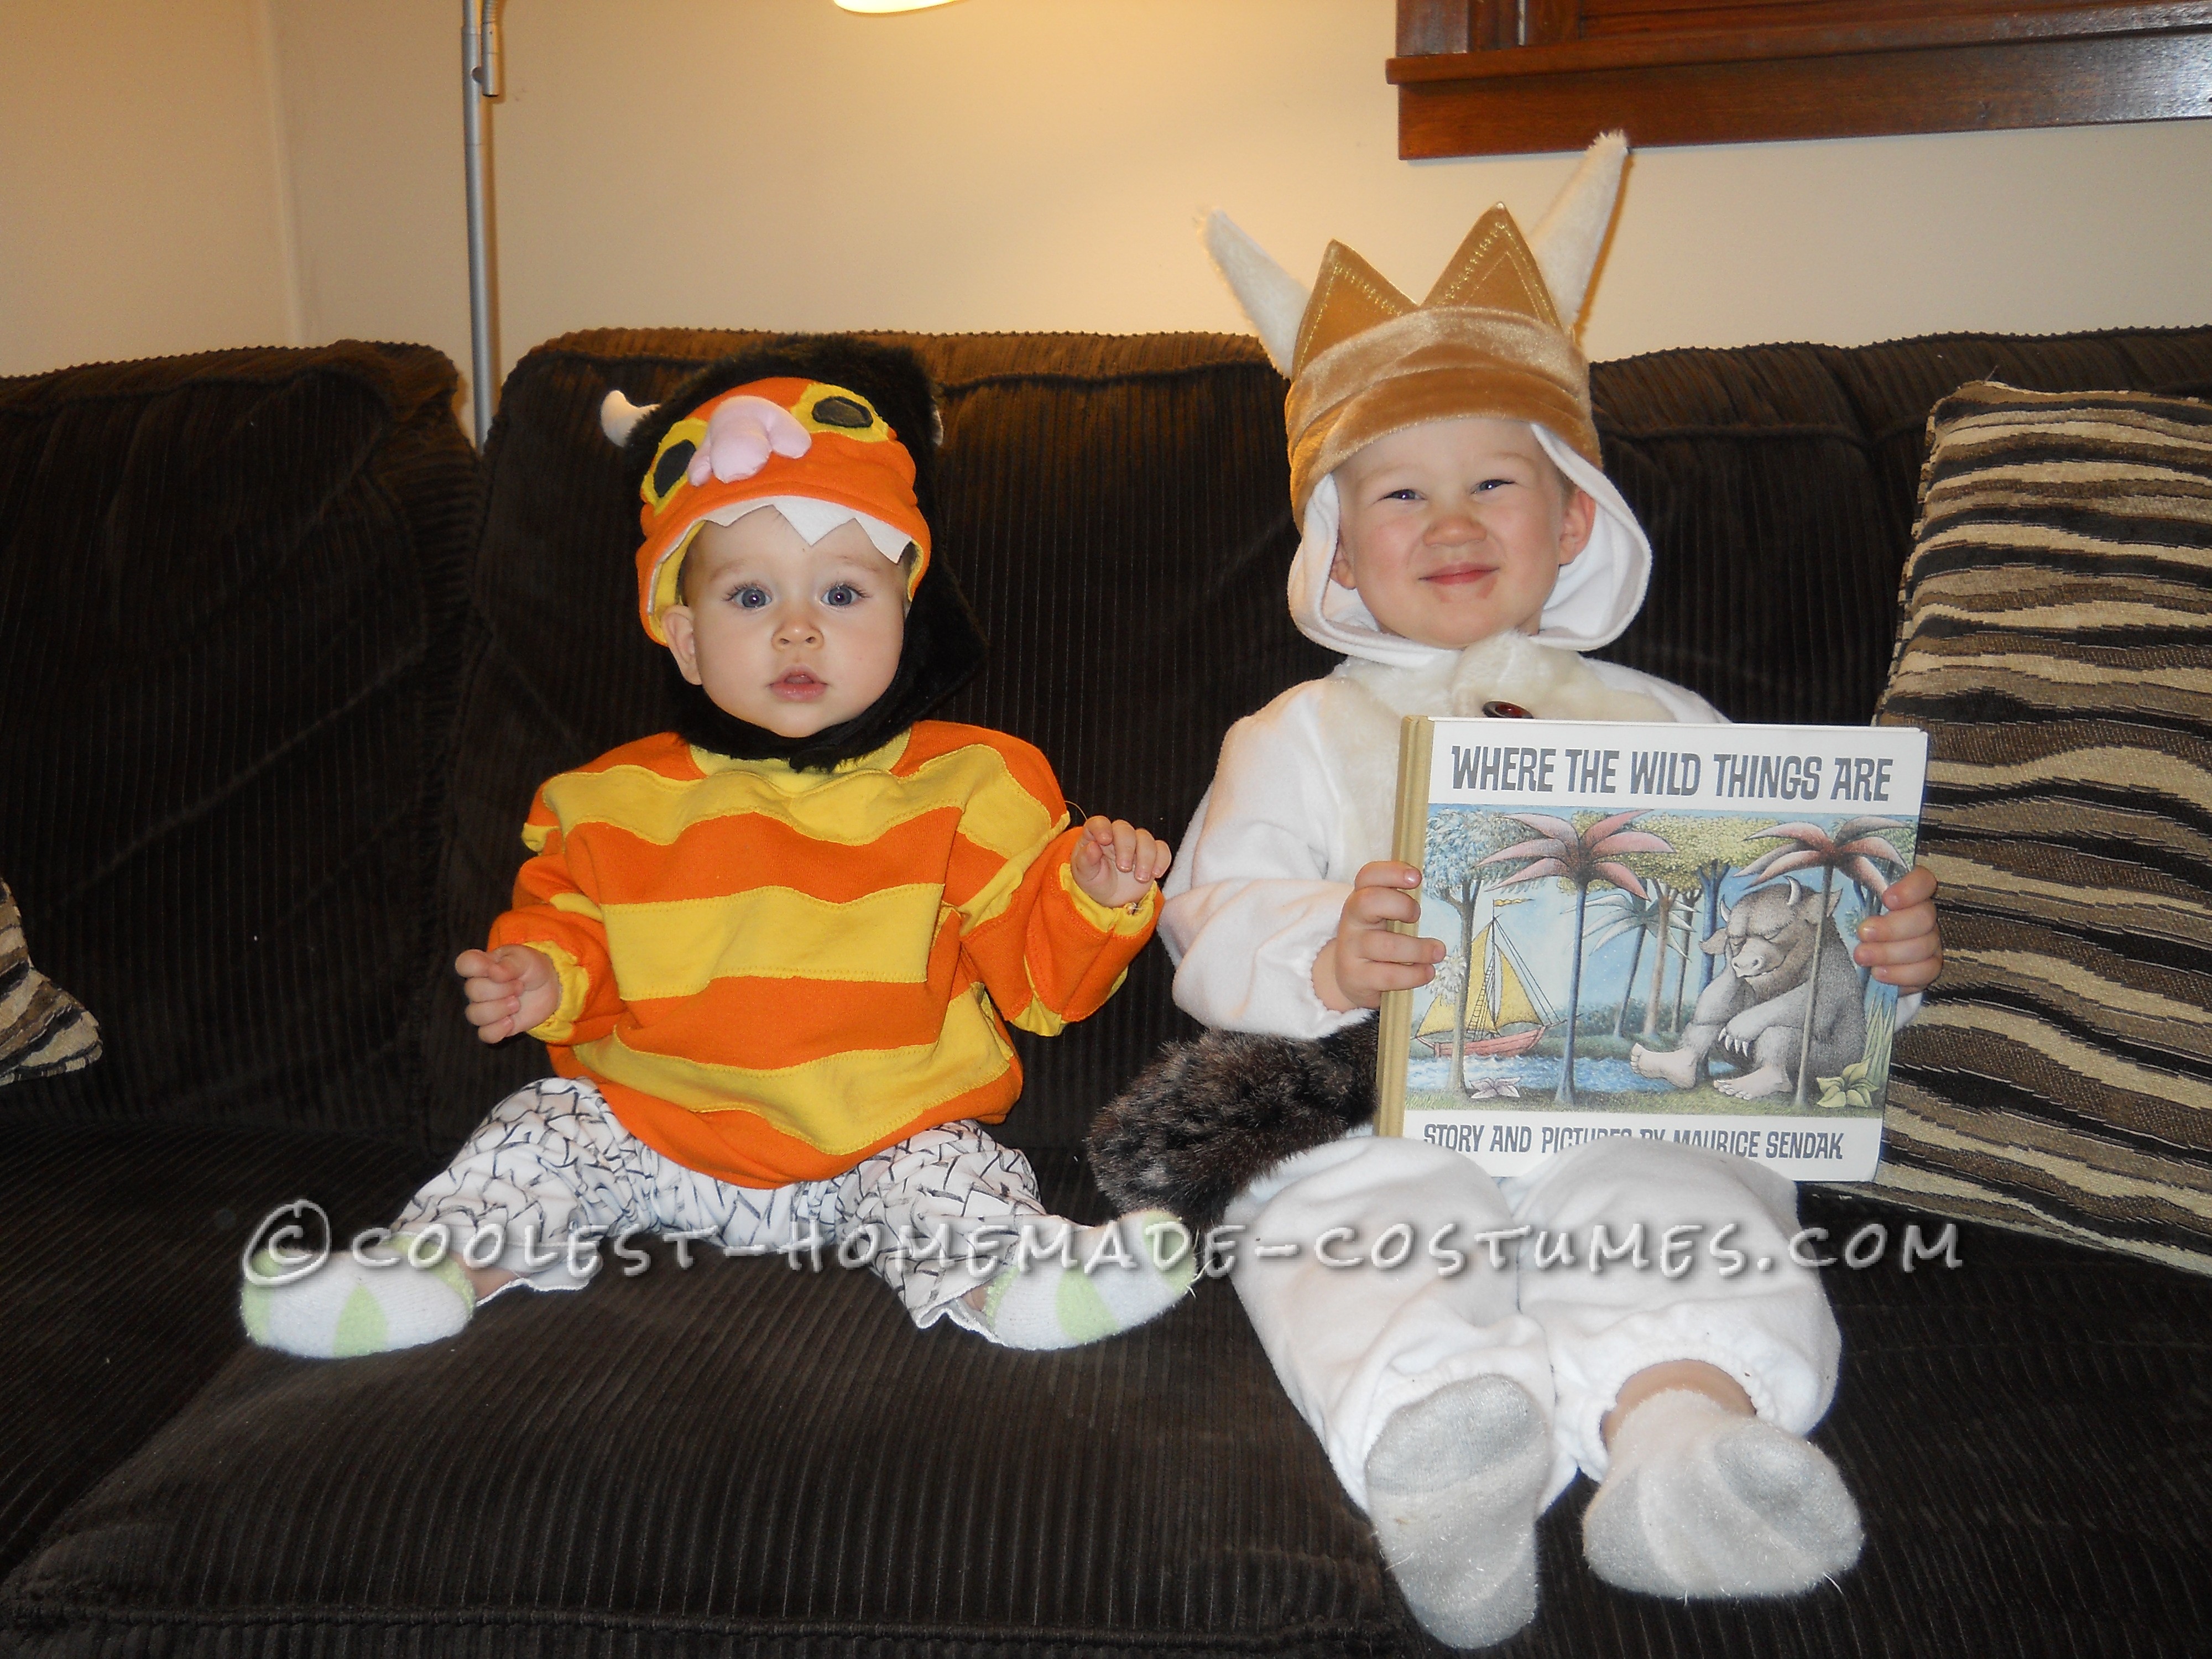 Best Ever "Where the Wild Things Are" Costumes for Preschoolers